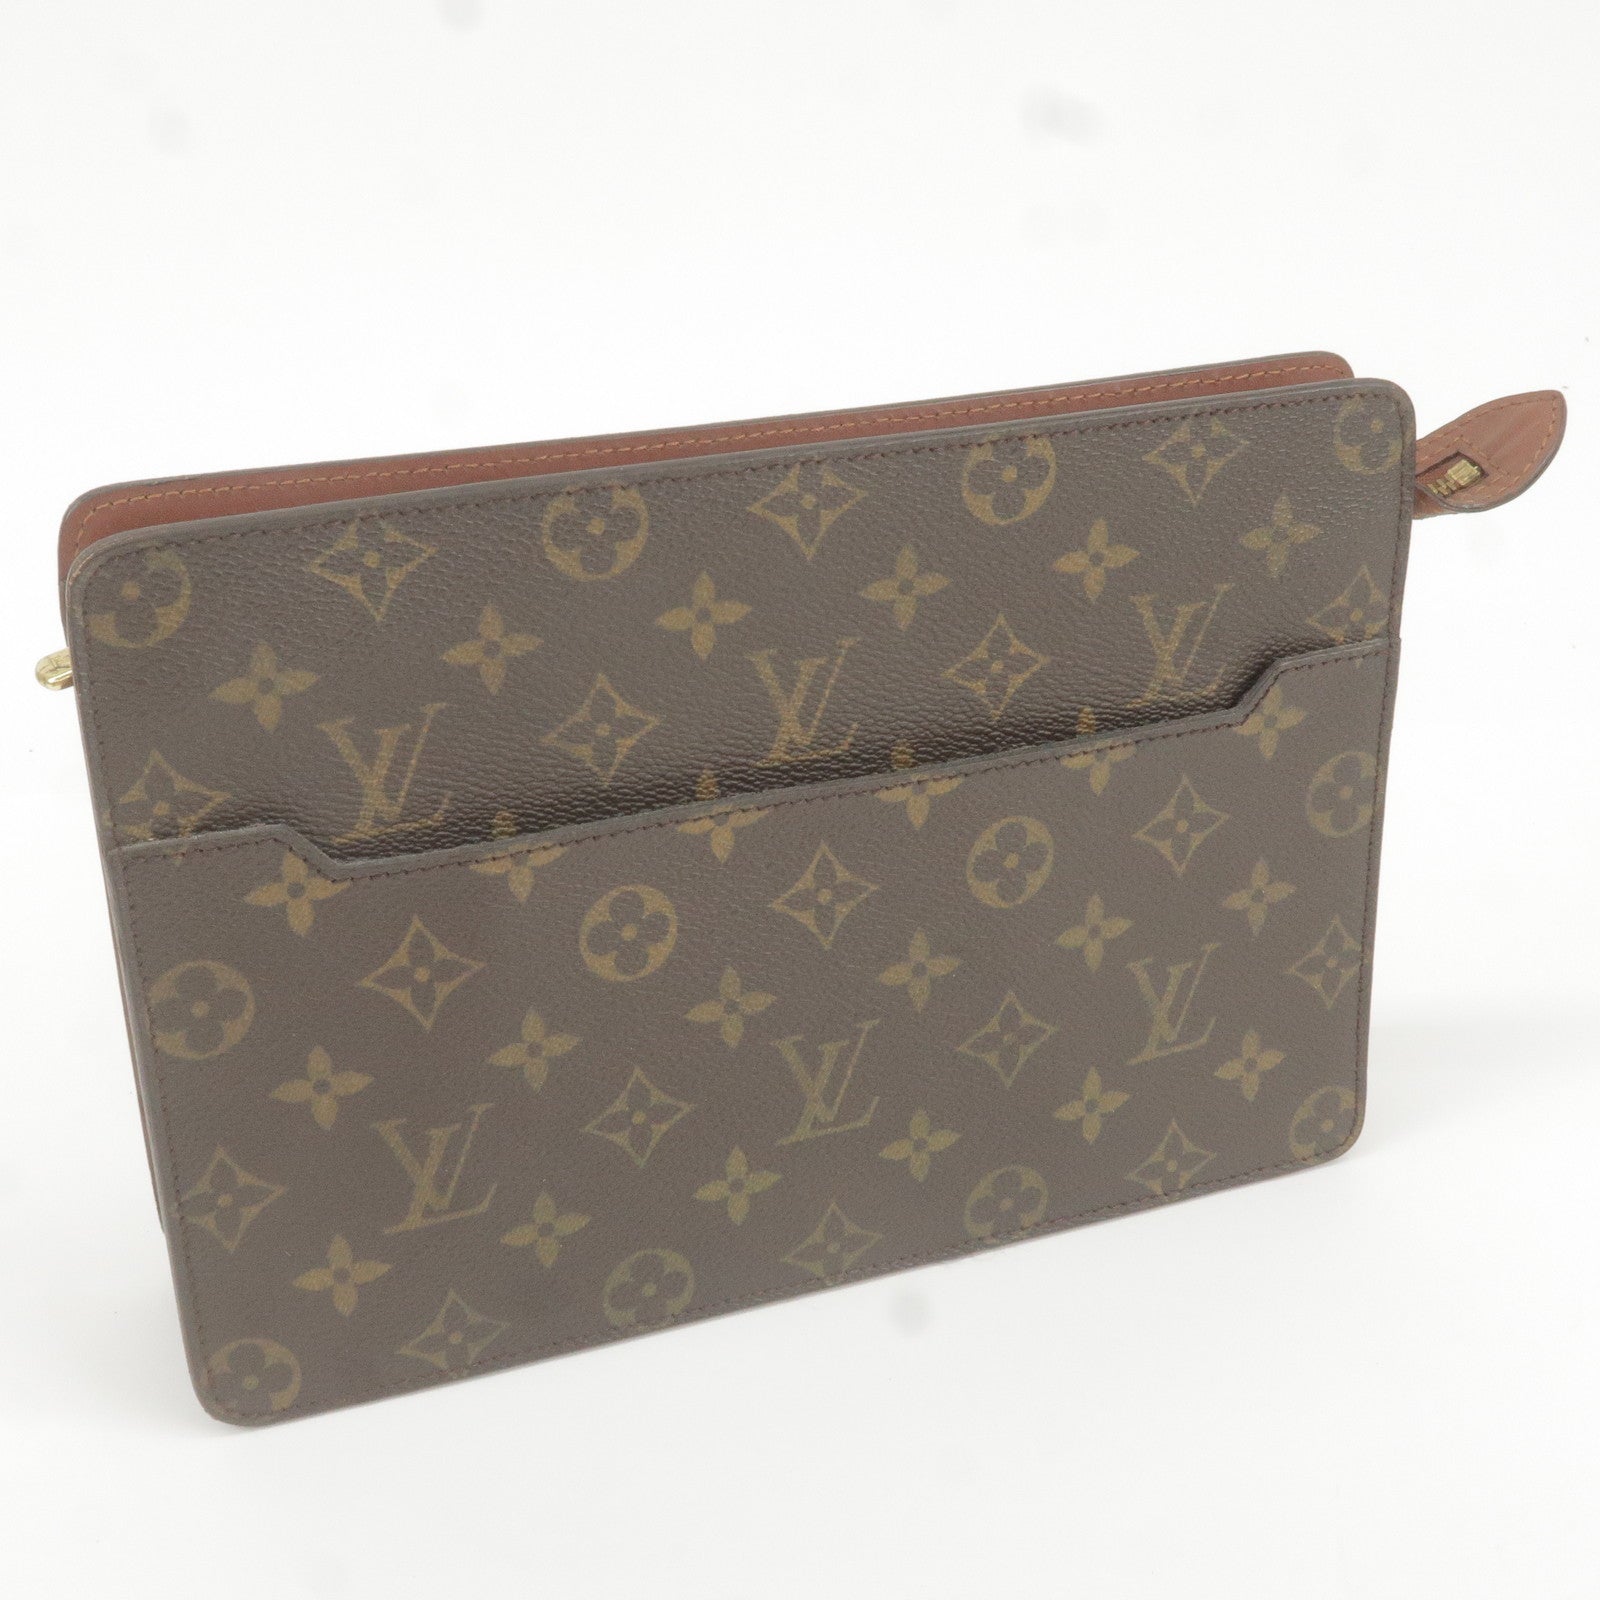 Pochette - Bag - Louis - Clutch - M51795 – dct - Homme - ep_vintage luxury  Store - Monogram - louis vuitton neverfull medium model shopping bag in  ebene damier canvas and brown leather - Vuitton